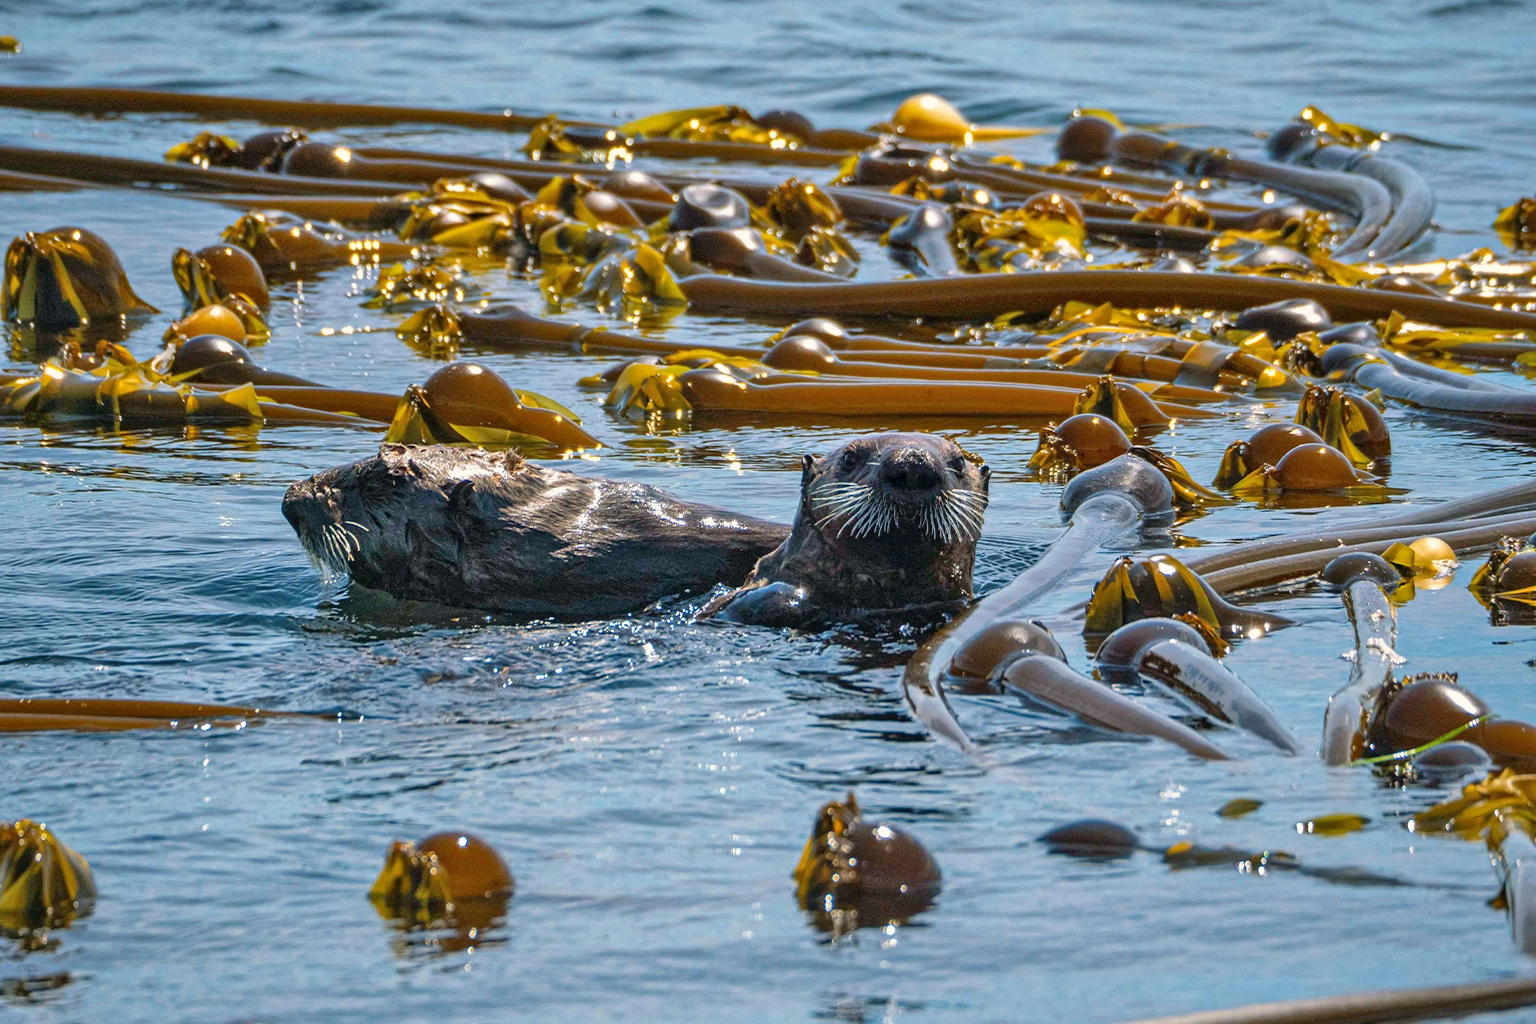 The sea otter is another apex predator with a big influence on the plant world. It helps control sea urchins, which, if left unchecked, can devour whole kelp forests, one of the planet’s most effective carbon sinks. Image by Kieran Wood via Unsplash (Public domain).